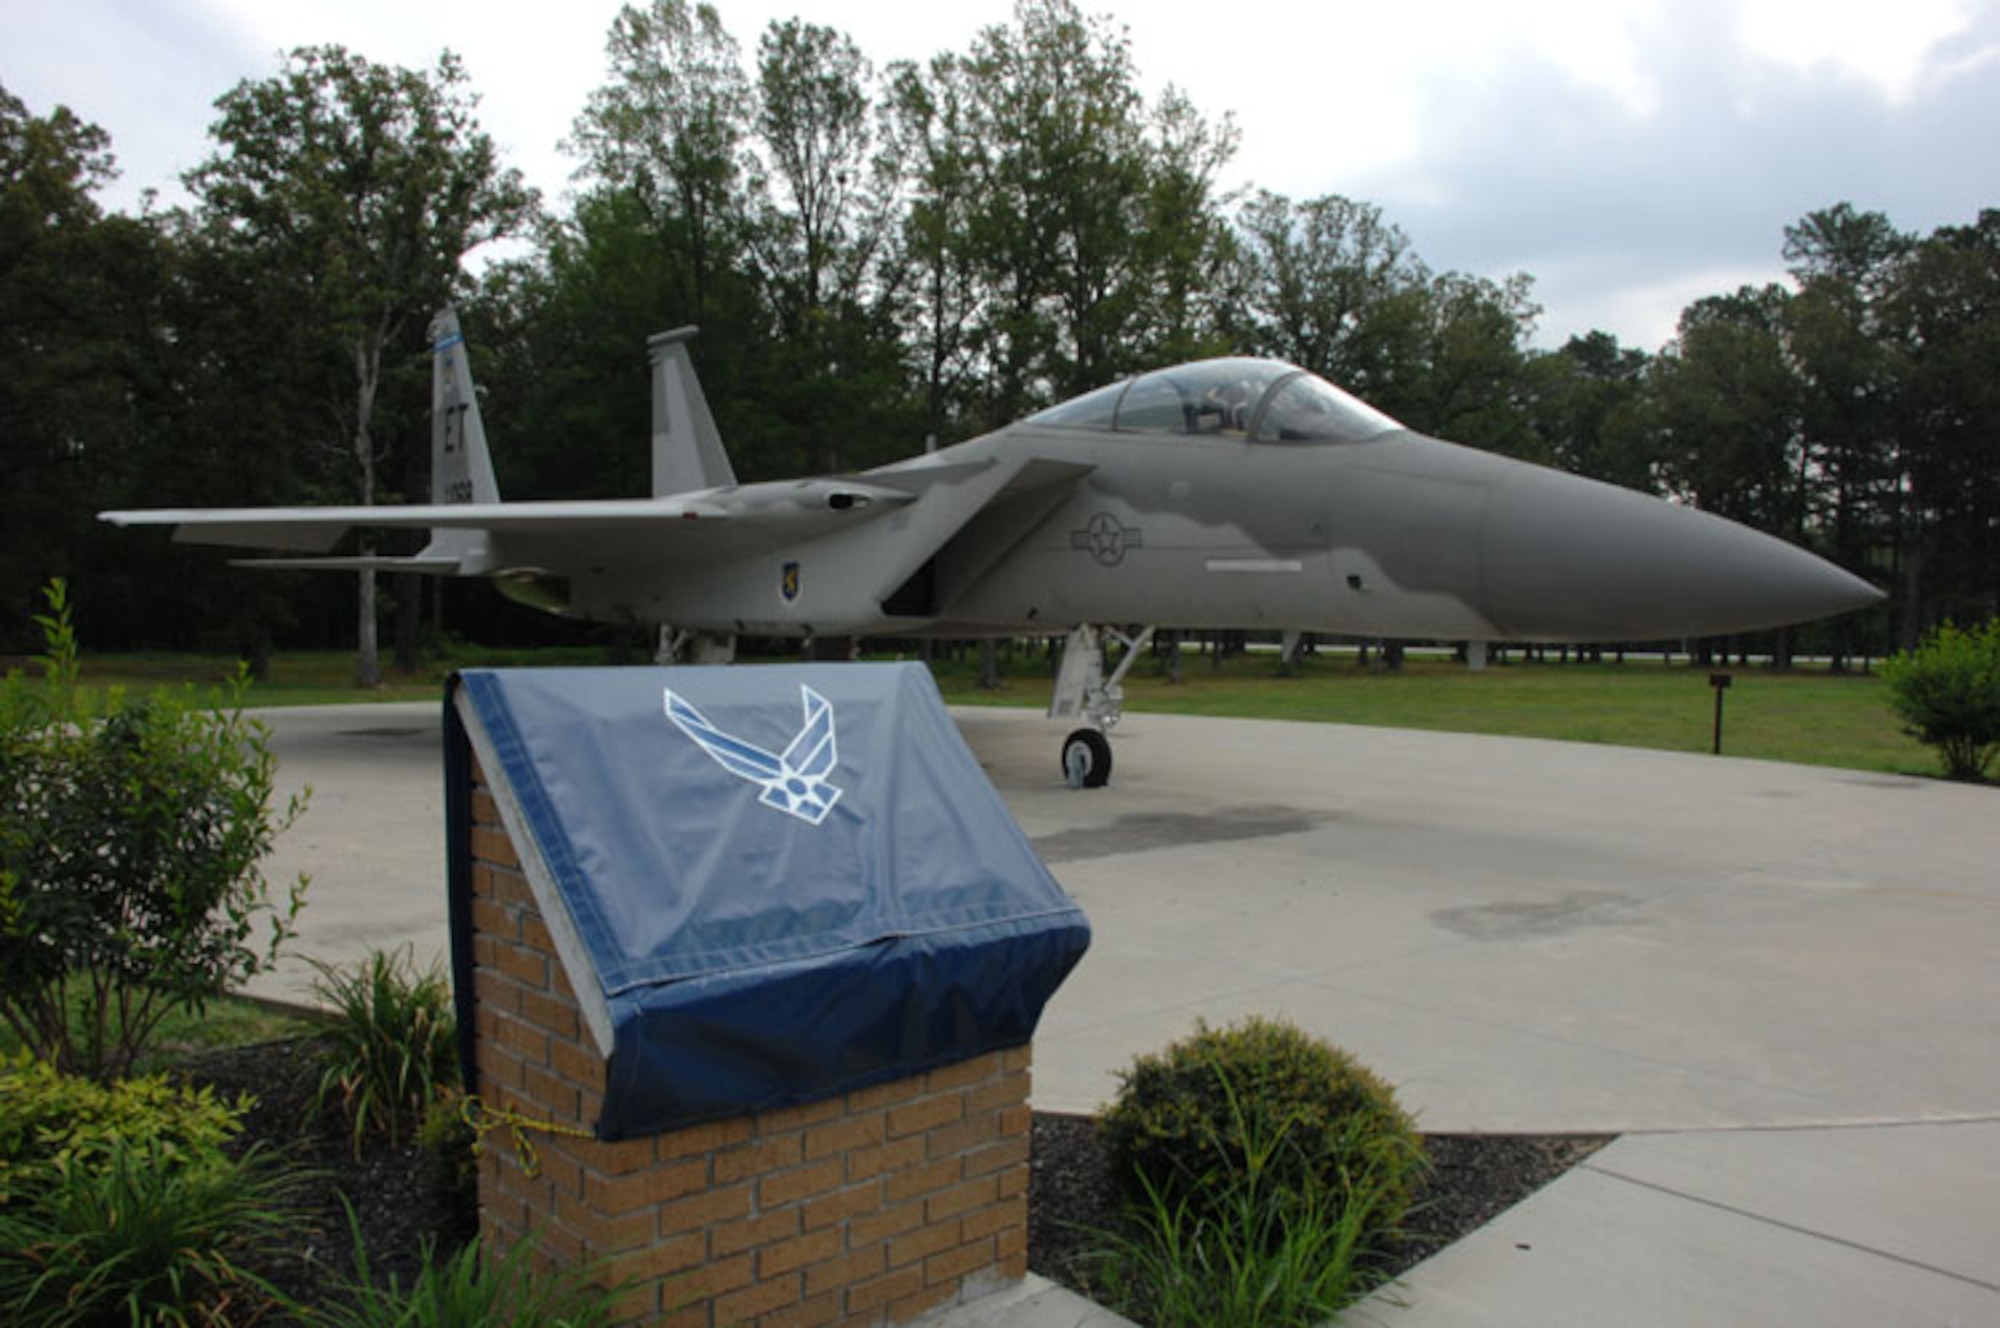 The F-15 static display aircraft at Arnold Air Force Base's Main Gate was dedicated in honor of Maj. Jim Duricy who was killed when he was forced to eject at high speed as the F-15 he piloted crashed into the Gulf of Mexico April 30, 2002. He was assigned to the 40th Flight Test Squadron, Eglin Air Force Base, Fla. (Air Force photo by David Housch) 